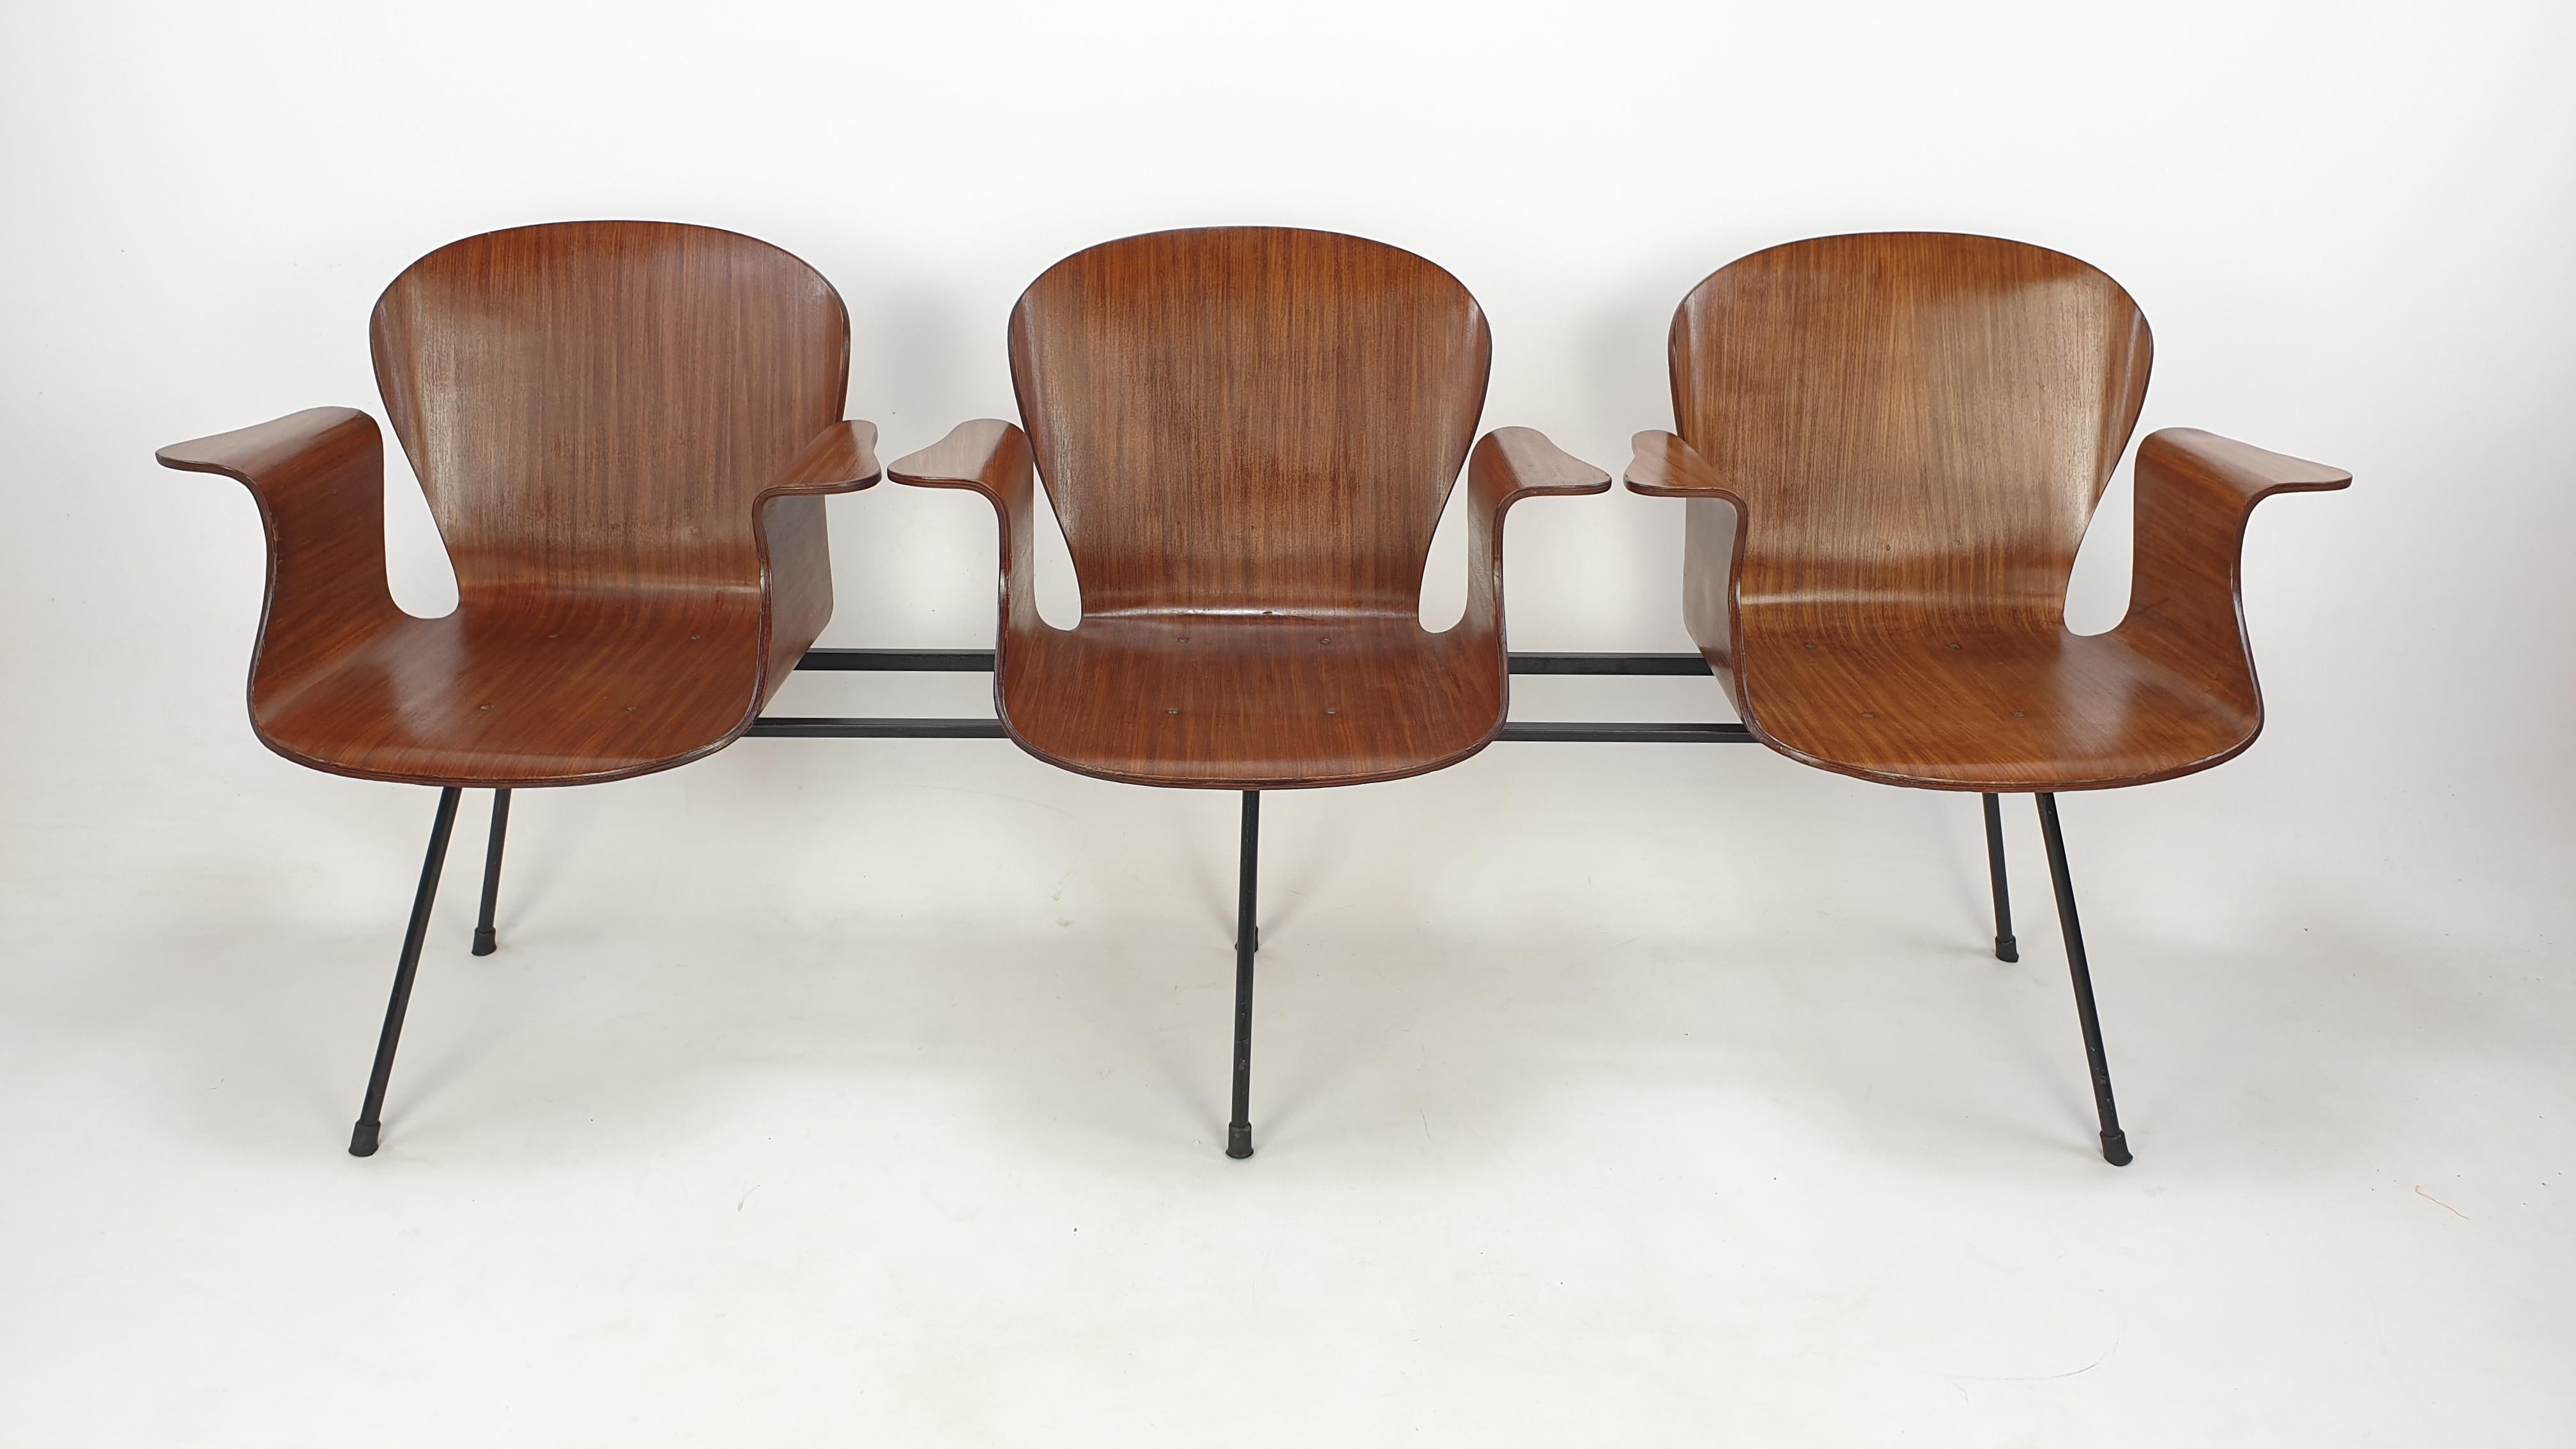 Very rare and beautiful Italian 3-seat bench by Carlo Ratti, 1950's. 

It is made of 3 molded teak seats supported by black steel legs, accented with brass hardware. 

Designed with lovely curves, a really piece of art!

It has the normal